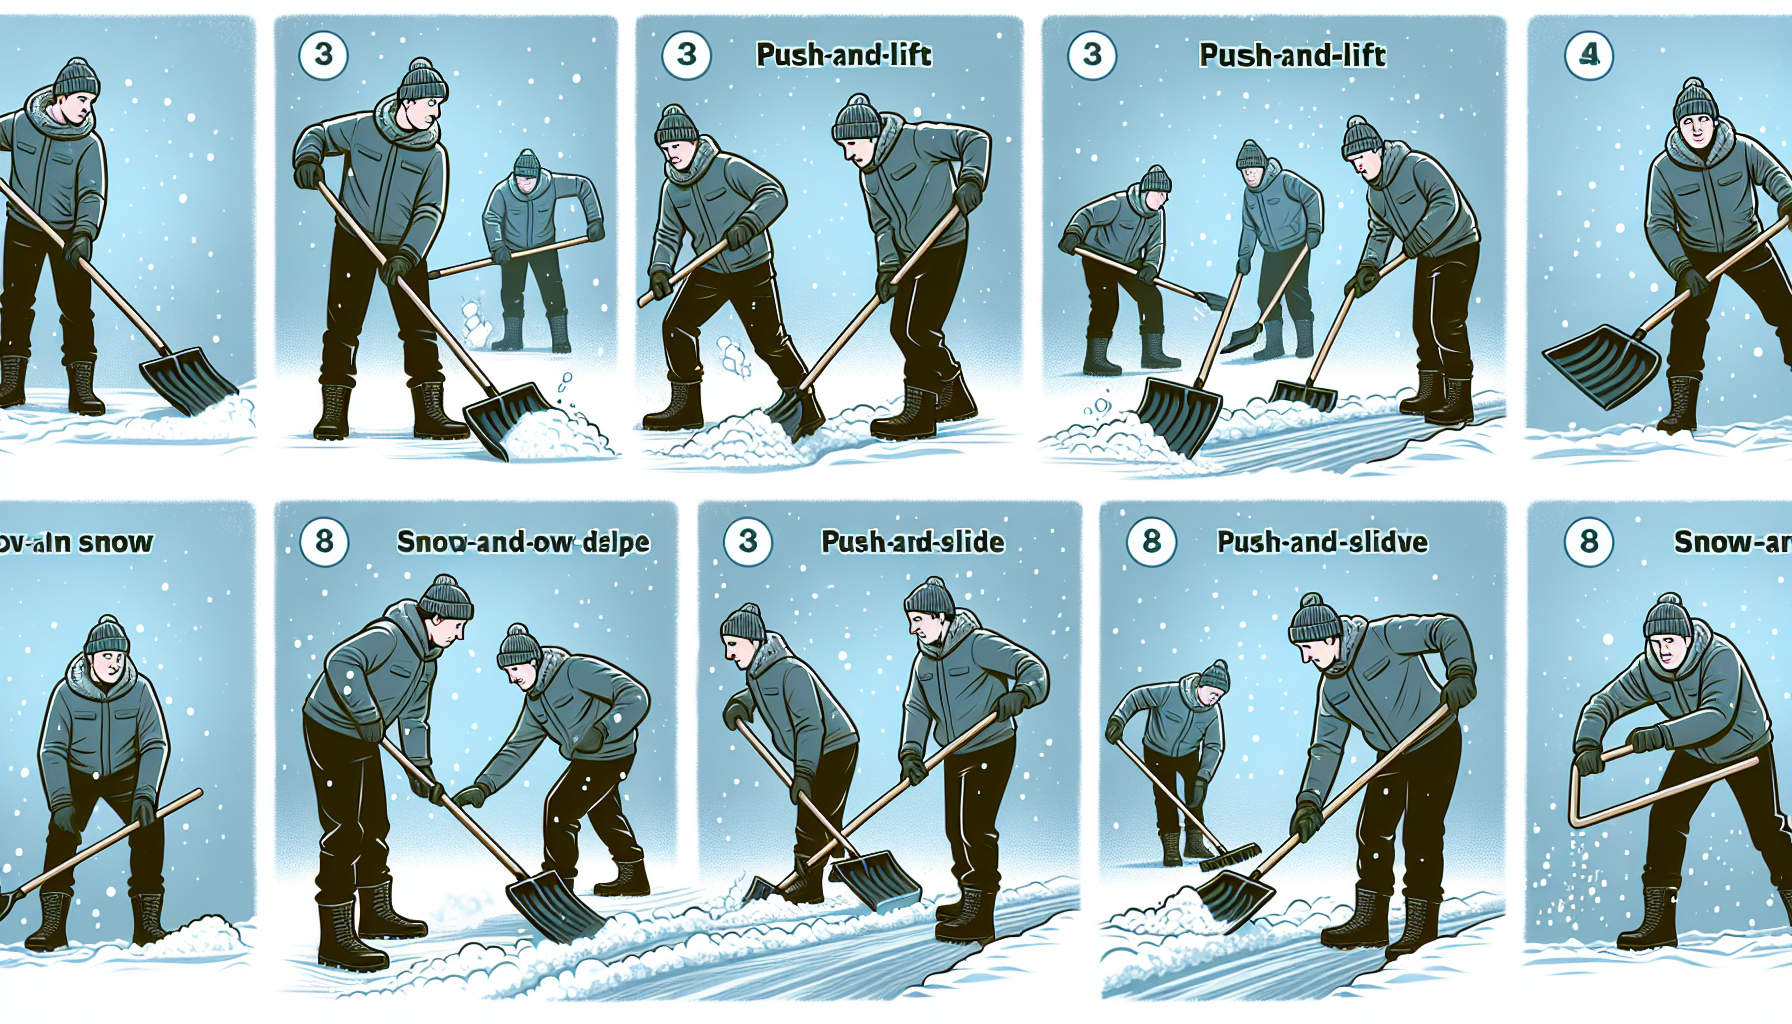 What Is The Best Shoveling Technique For Snow?